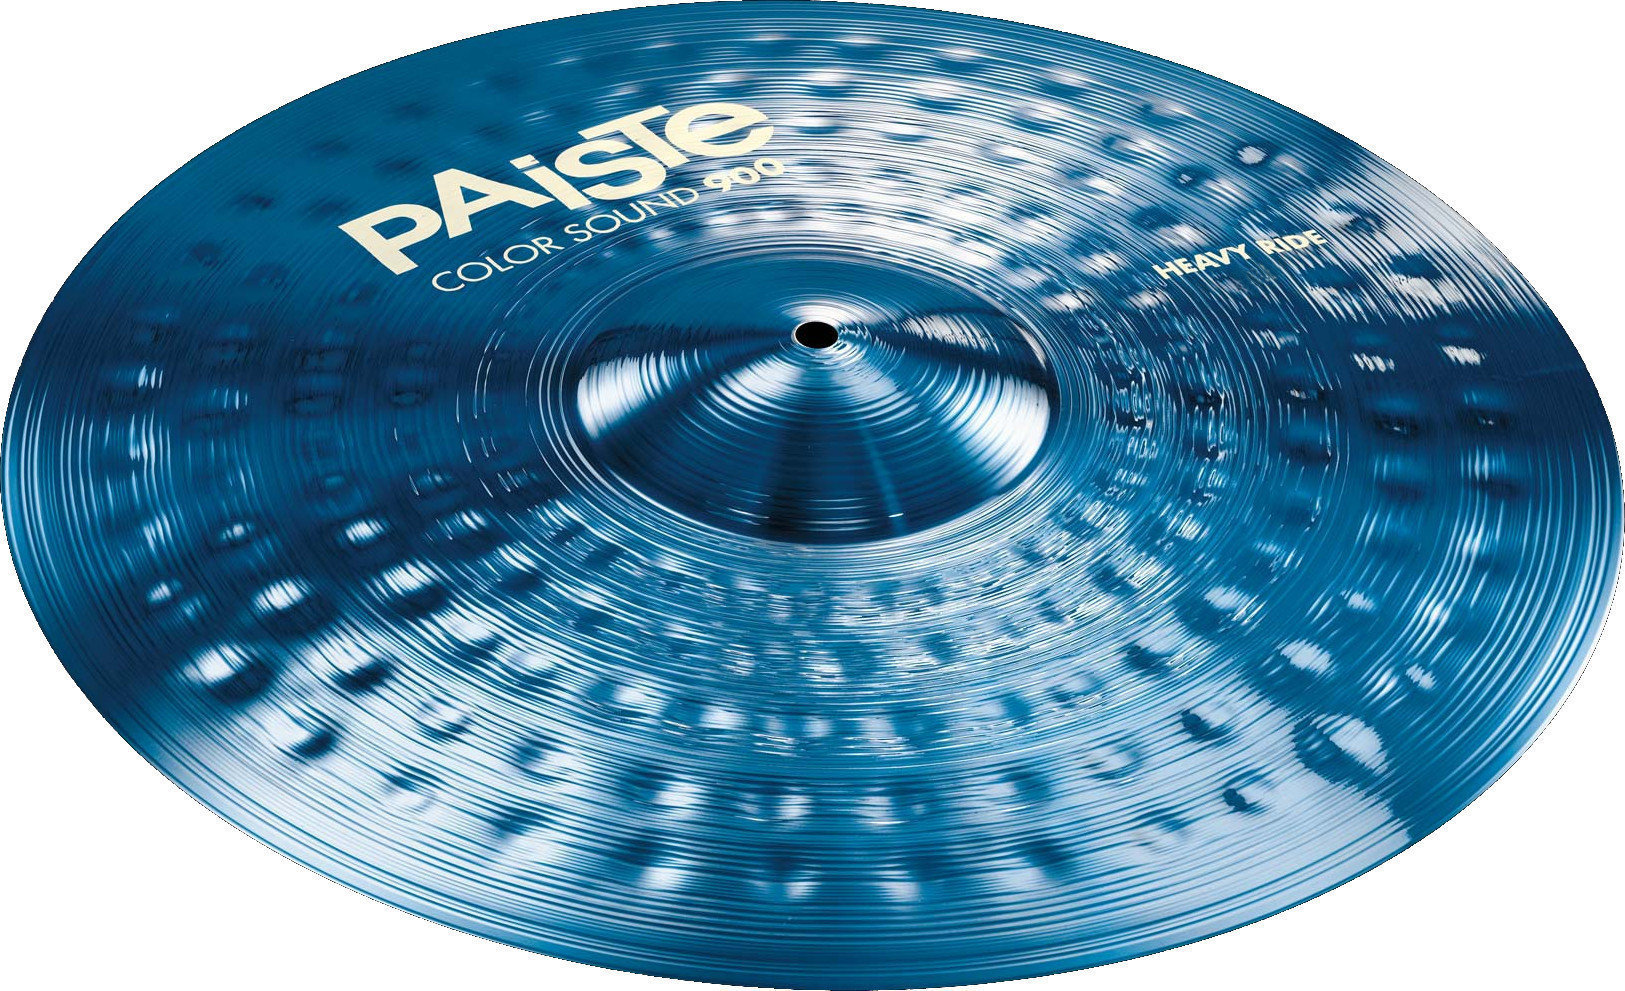 Ride Cymbal Paiste Color Sound 900  Heavy Ride Cymbal 22" Blue